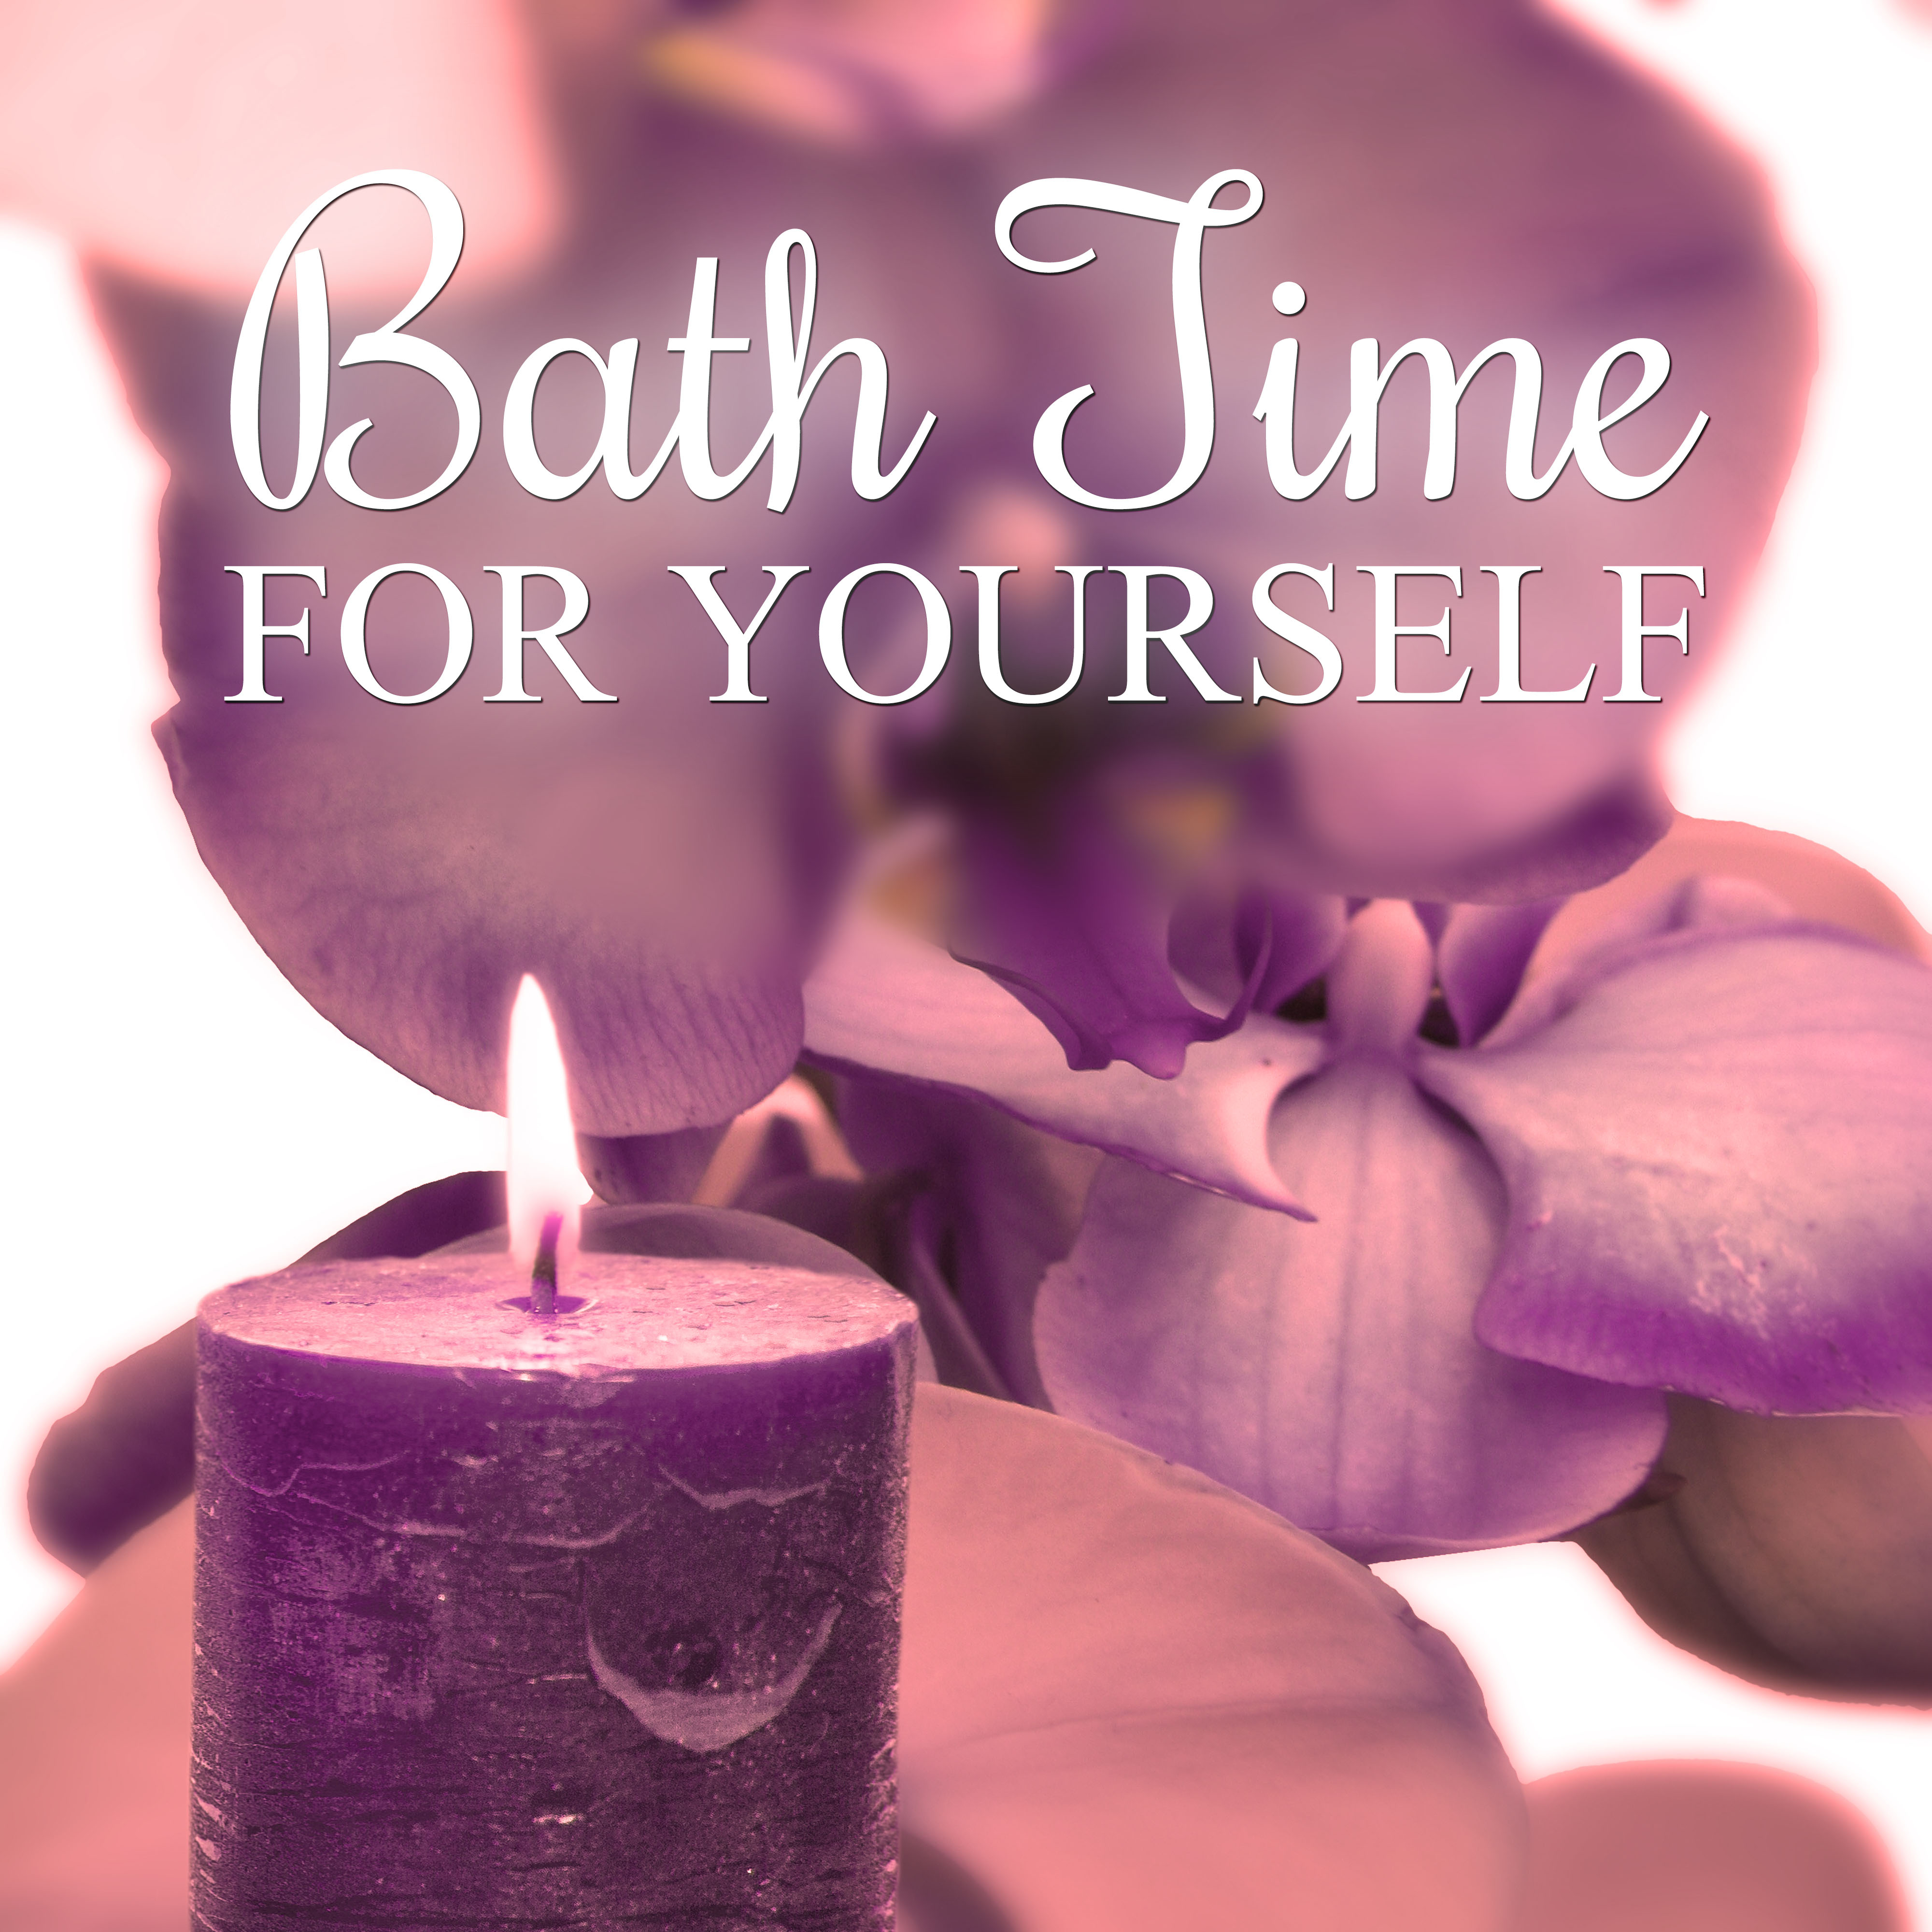 Bath Time for Yourself - Ultimate Natural Music  for Deep Relax and Get Positive Energy, Healing Nature Sounds for SPA, Massage Therapy, Sleep Music for Meditation